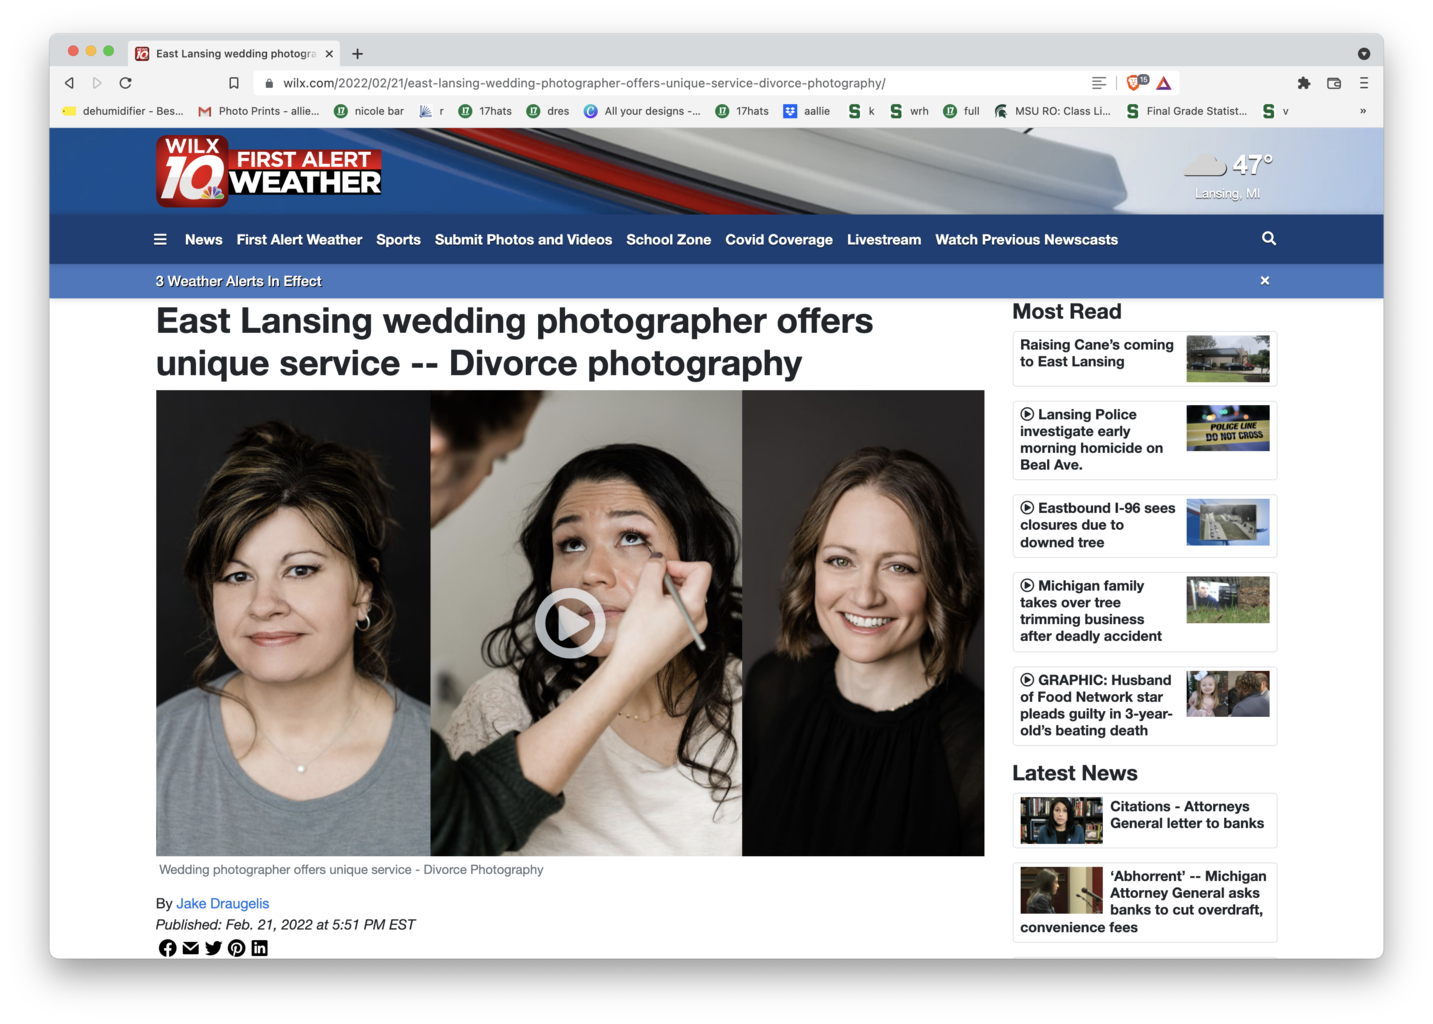 WILX featured news story about divorce photography